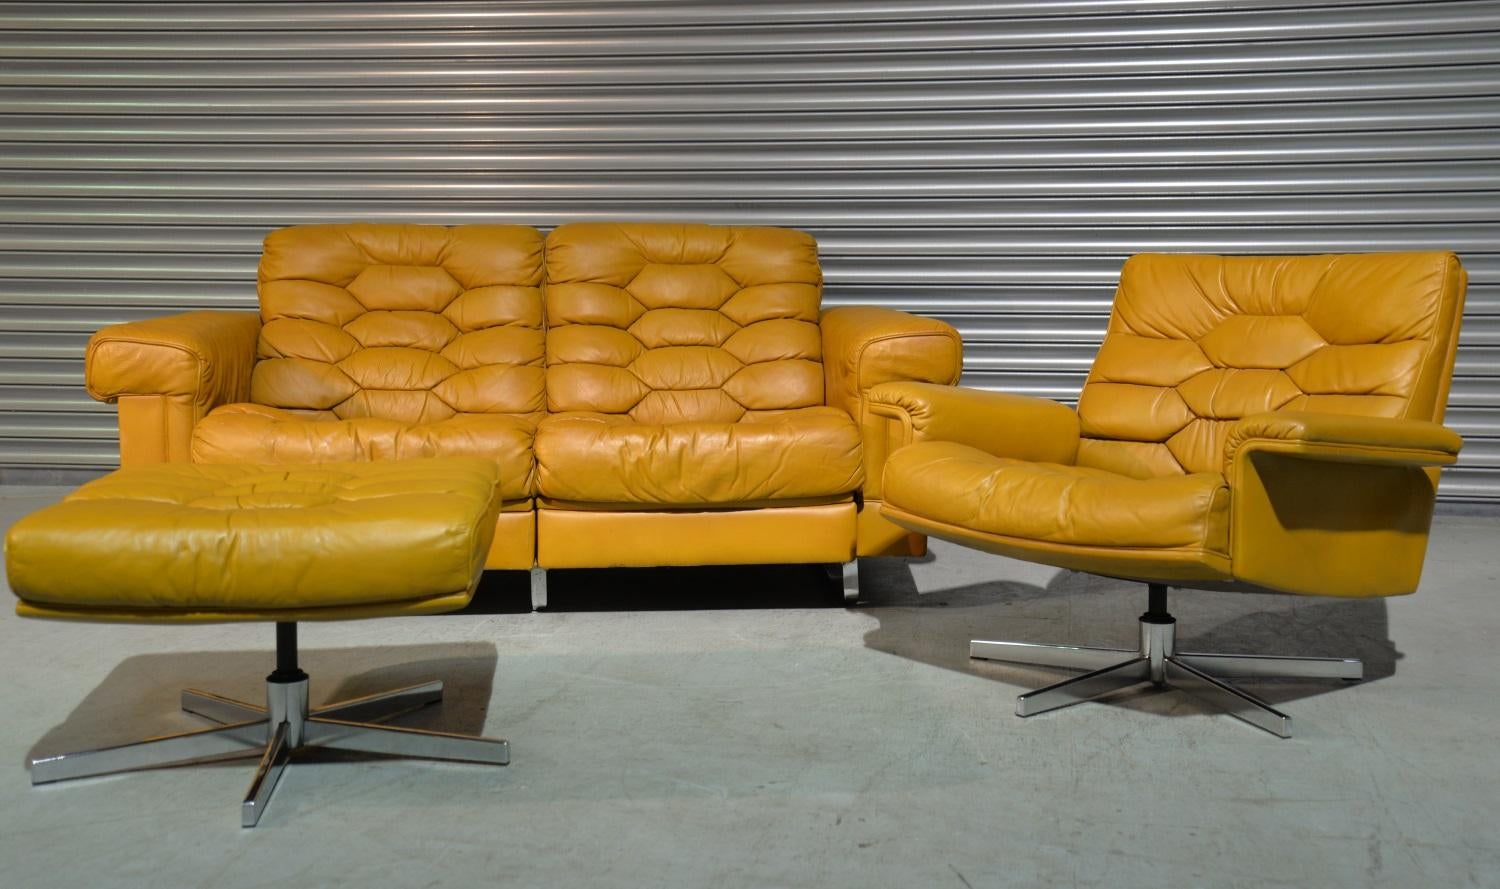 Discounted airfreight for our US and International customers ( from 2 weeks door to door ) 

We are delighted to bring to you a beautiful two-seat reclining sofa, matching swivel armchair and ottoman from De Sede of Switzerland. Designed by Robert